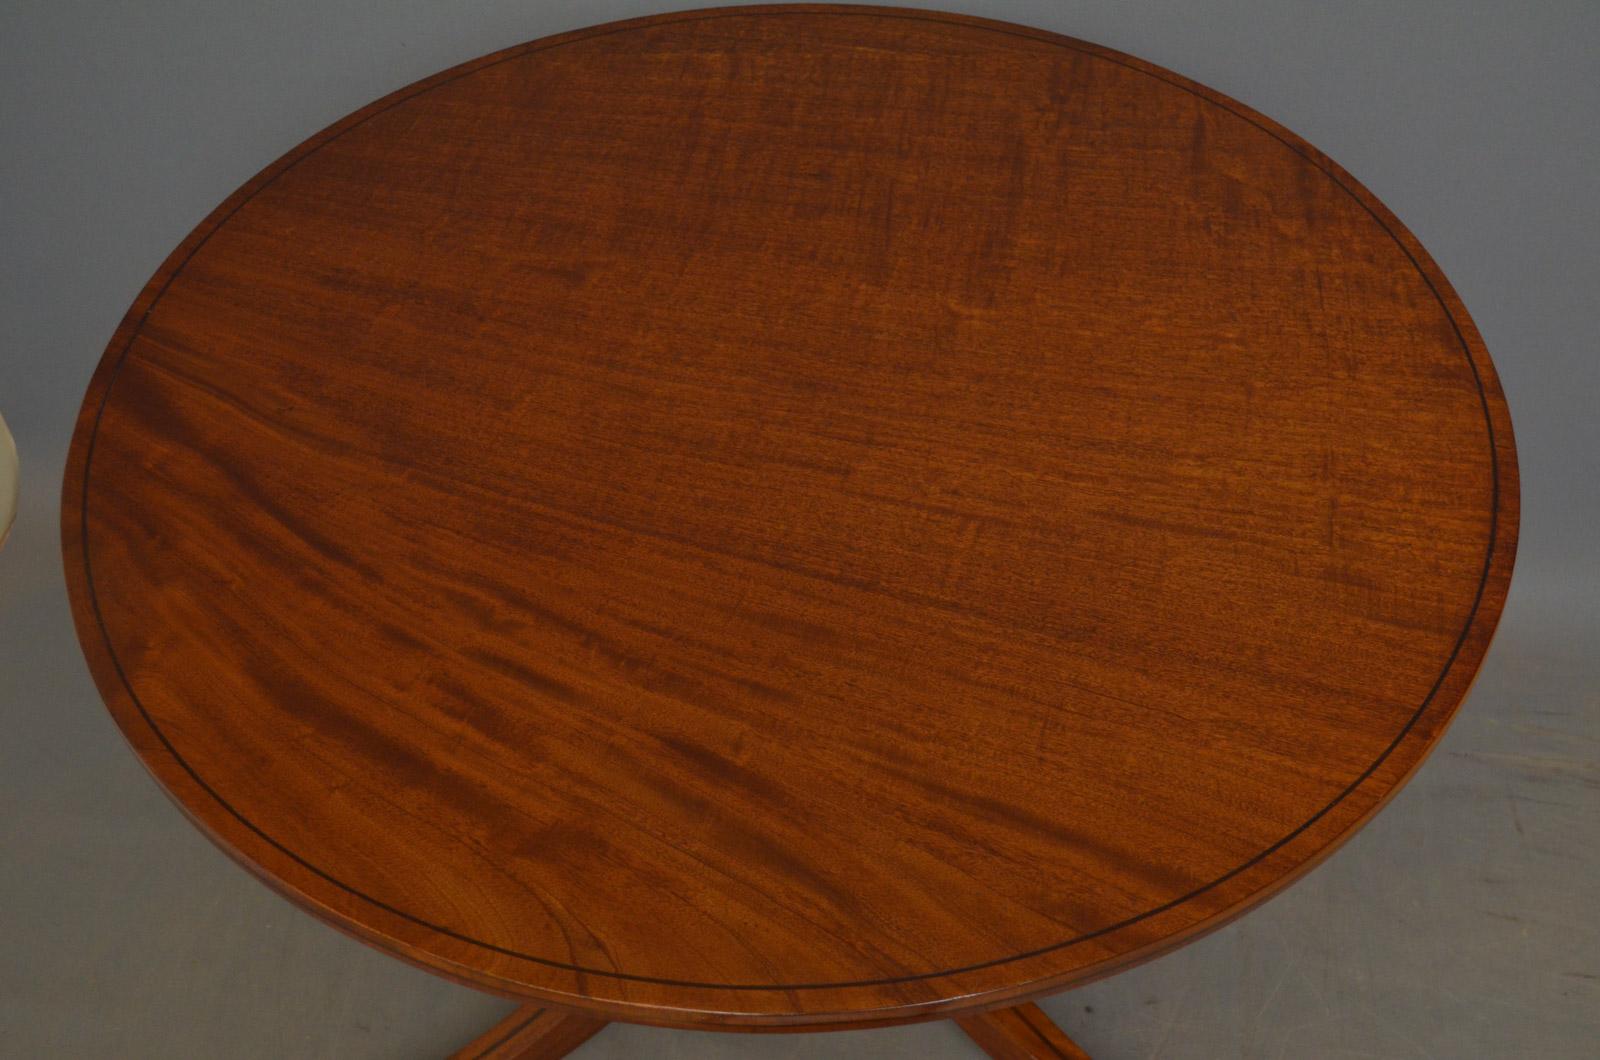 Sn4501, fine quality Regency mahogany dining table or centre table, having figured mahogany top with string inlaid edge and turned, ringed and ebonised column terminating in 2 downswept string inlaid legs and original brass paw feet castors. This